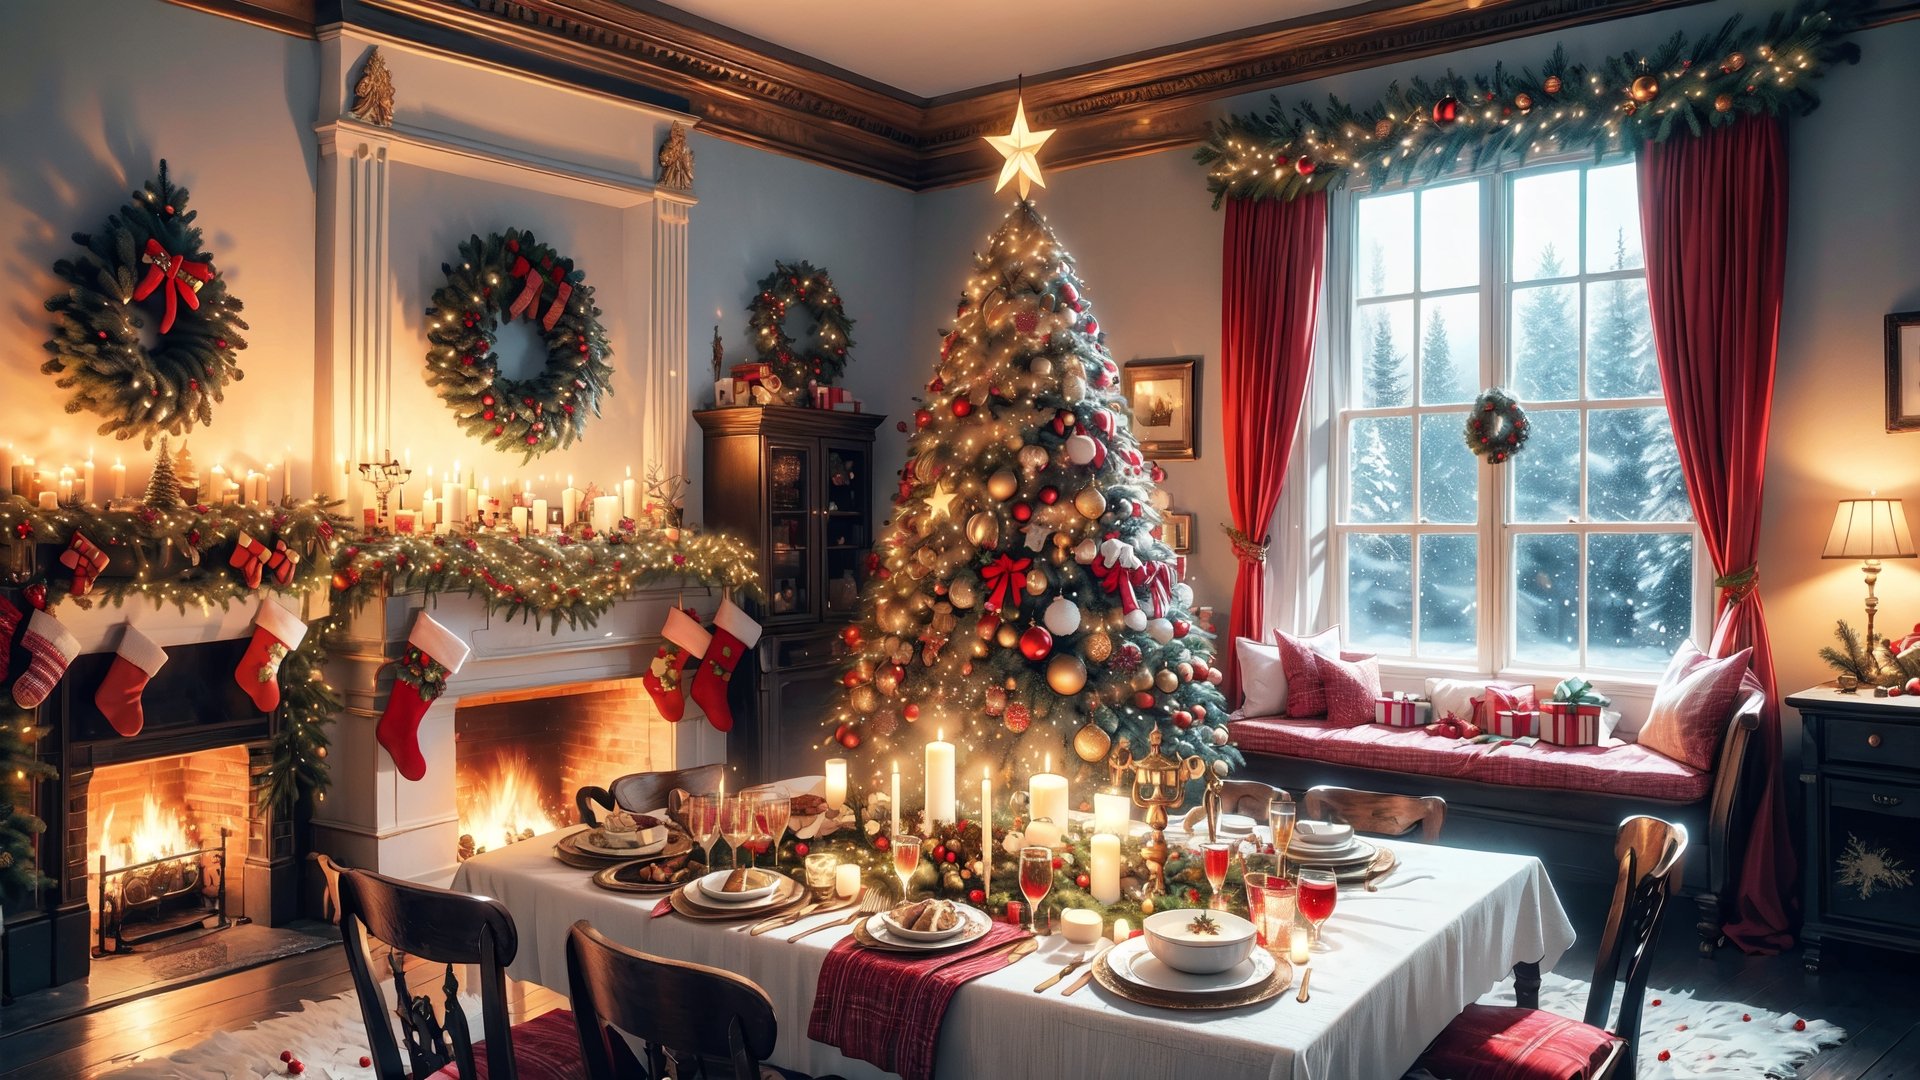 Christmas tea, window overlooking a magical forest, curtains on the window, magic, Christmas background, Mysterious, Mysterious,Christmas Room,Santa Claus